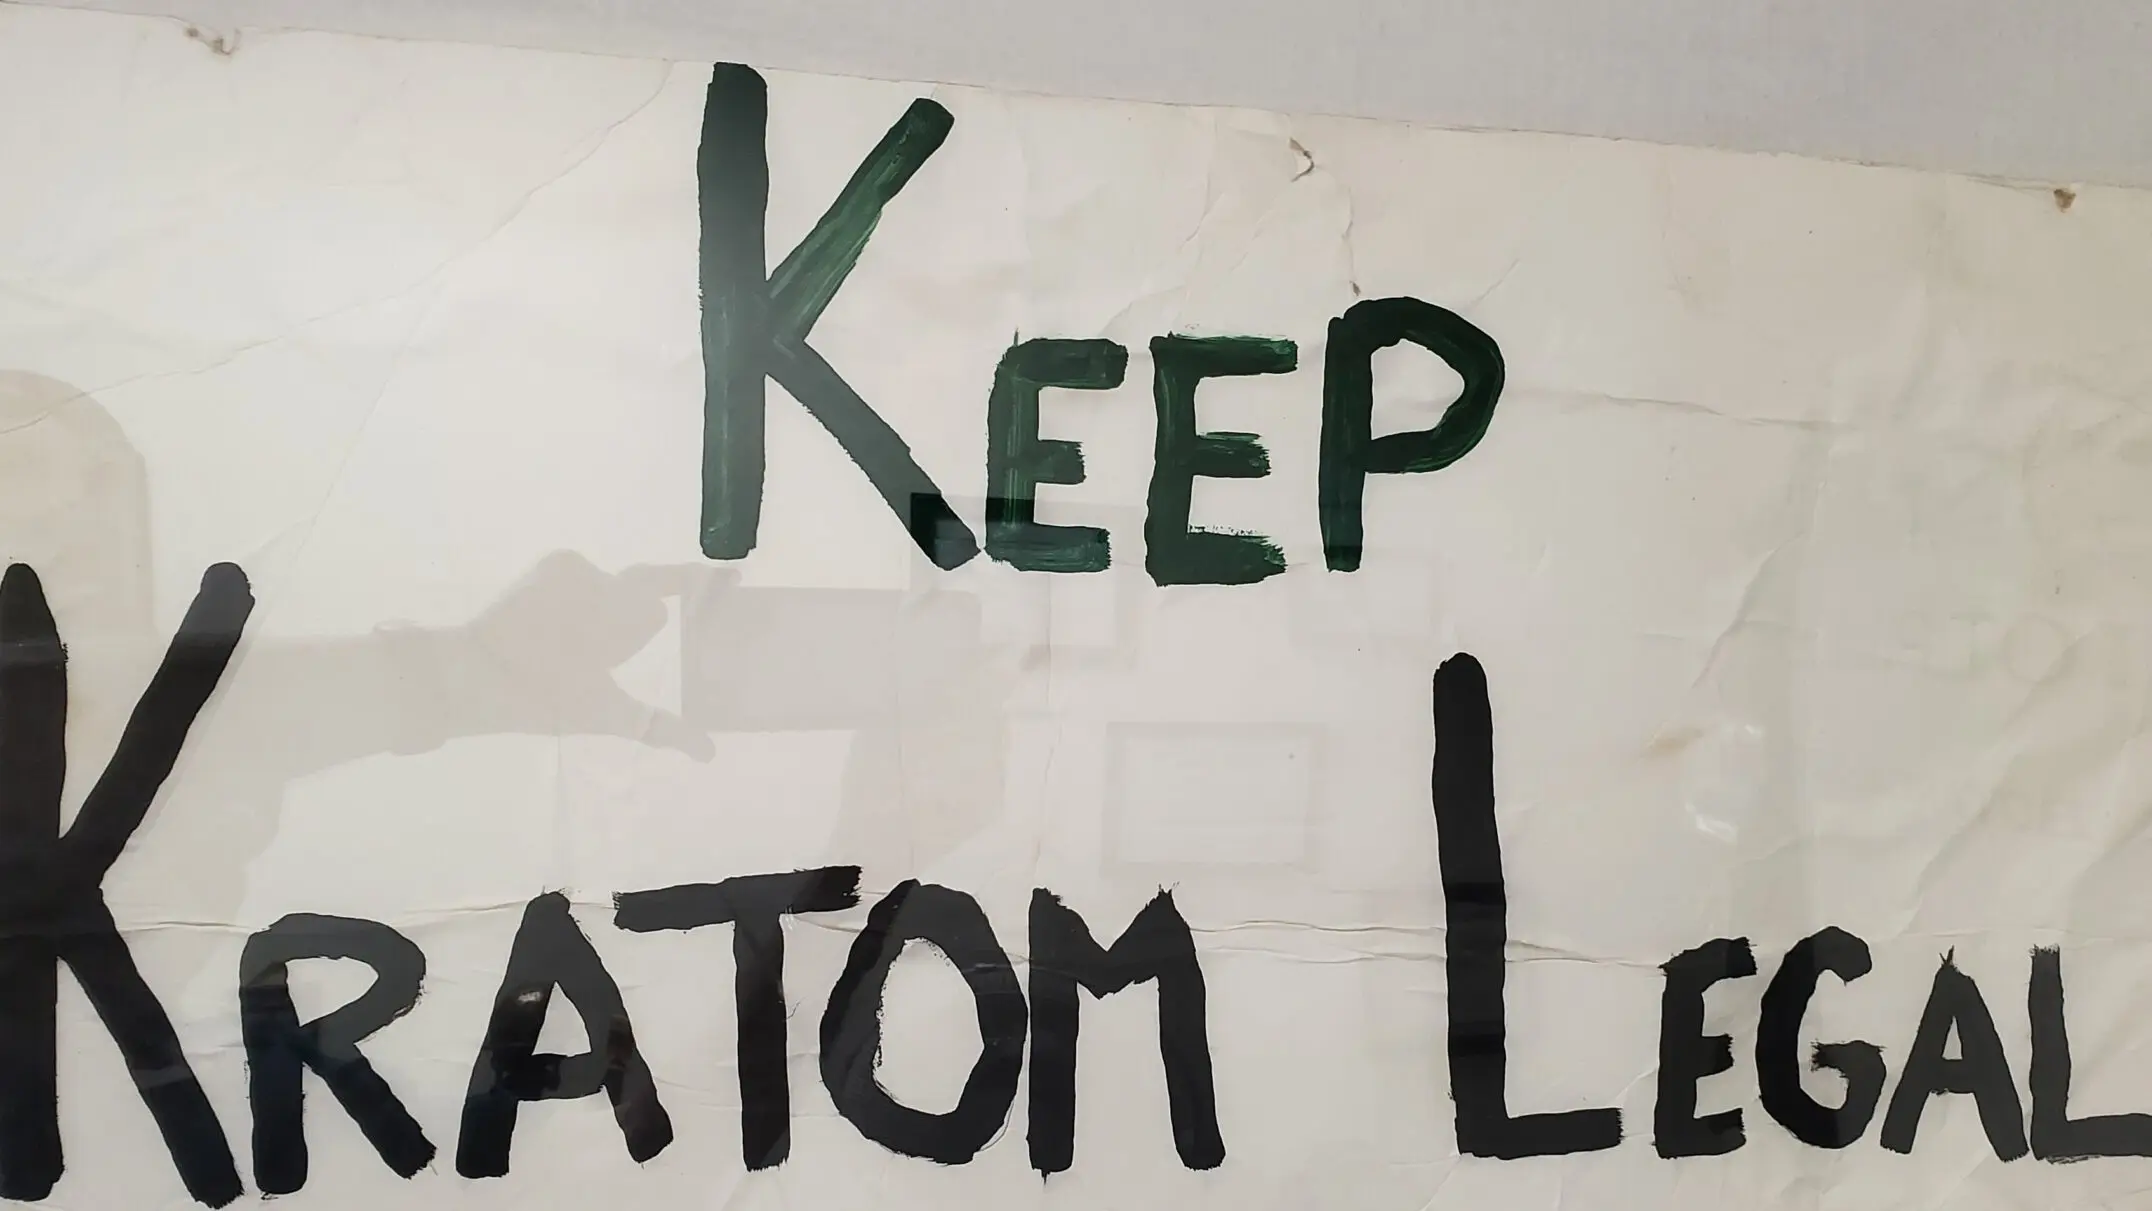 Continuing the Advocacy: Christopher's Protest Sign for Keeping Kratom Legal in the United States, Washington DC, September 13th, 2016.